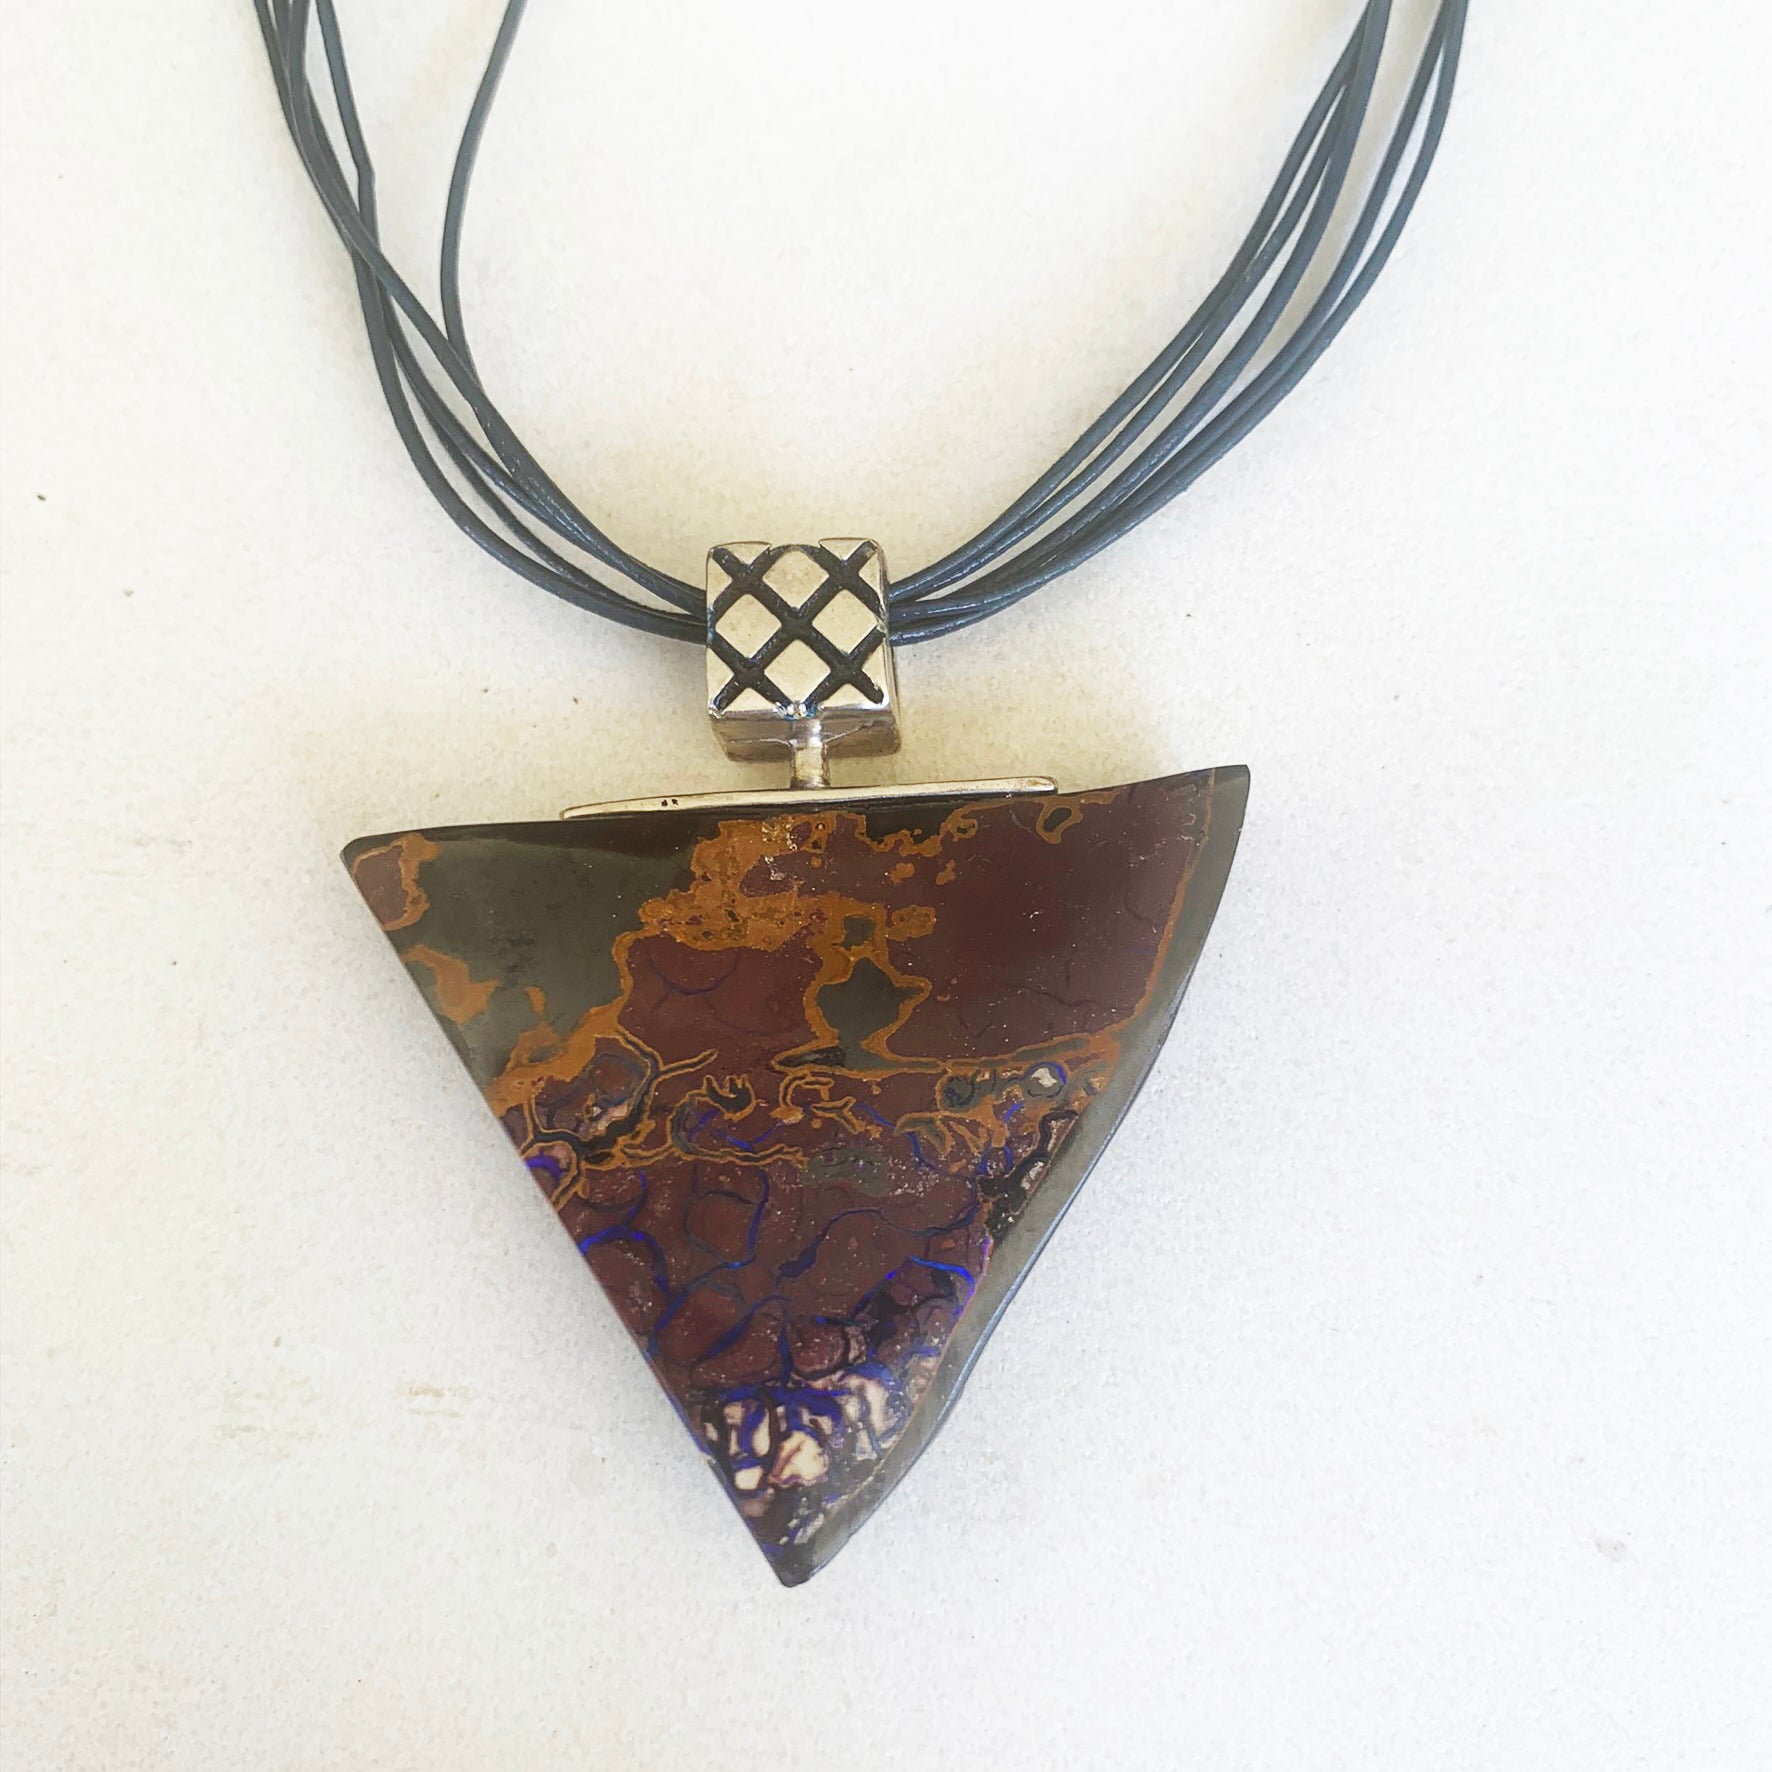 Large triangular boulder opal pendant with artistic pattern